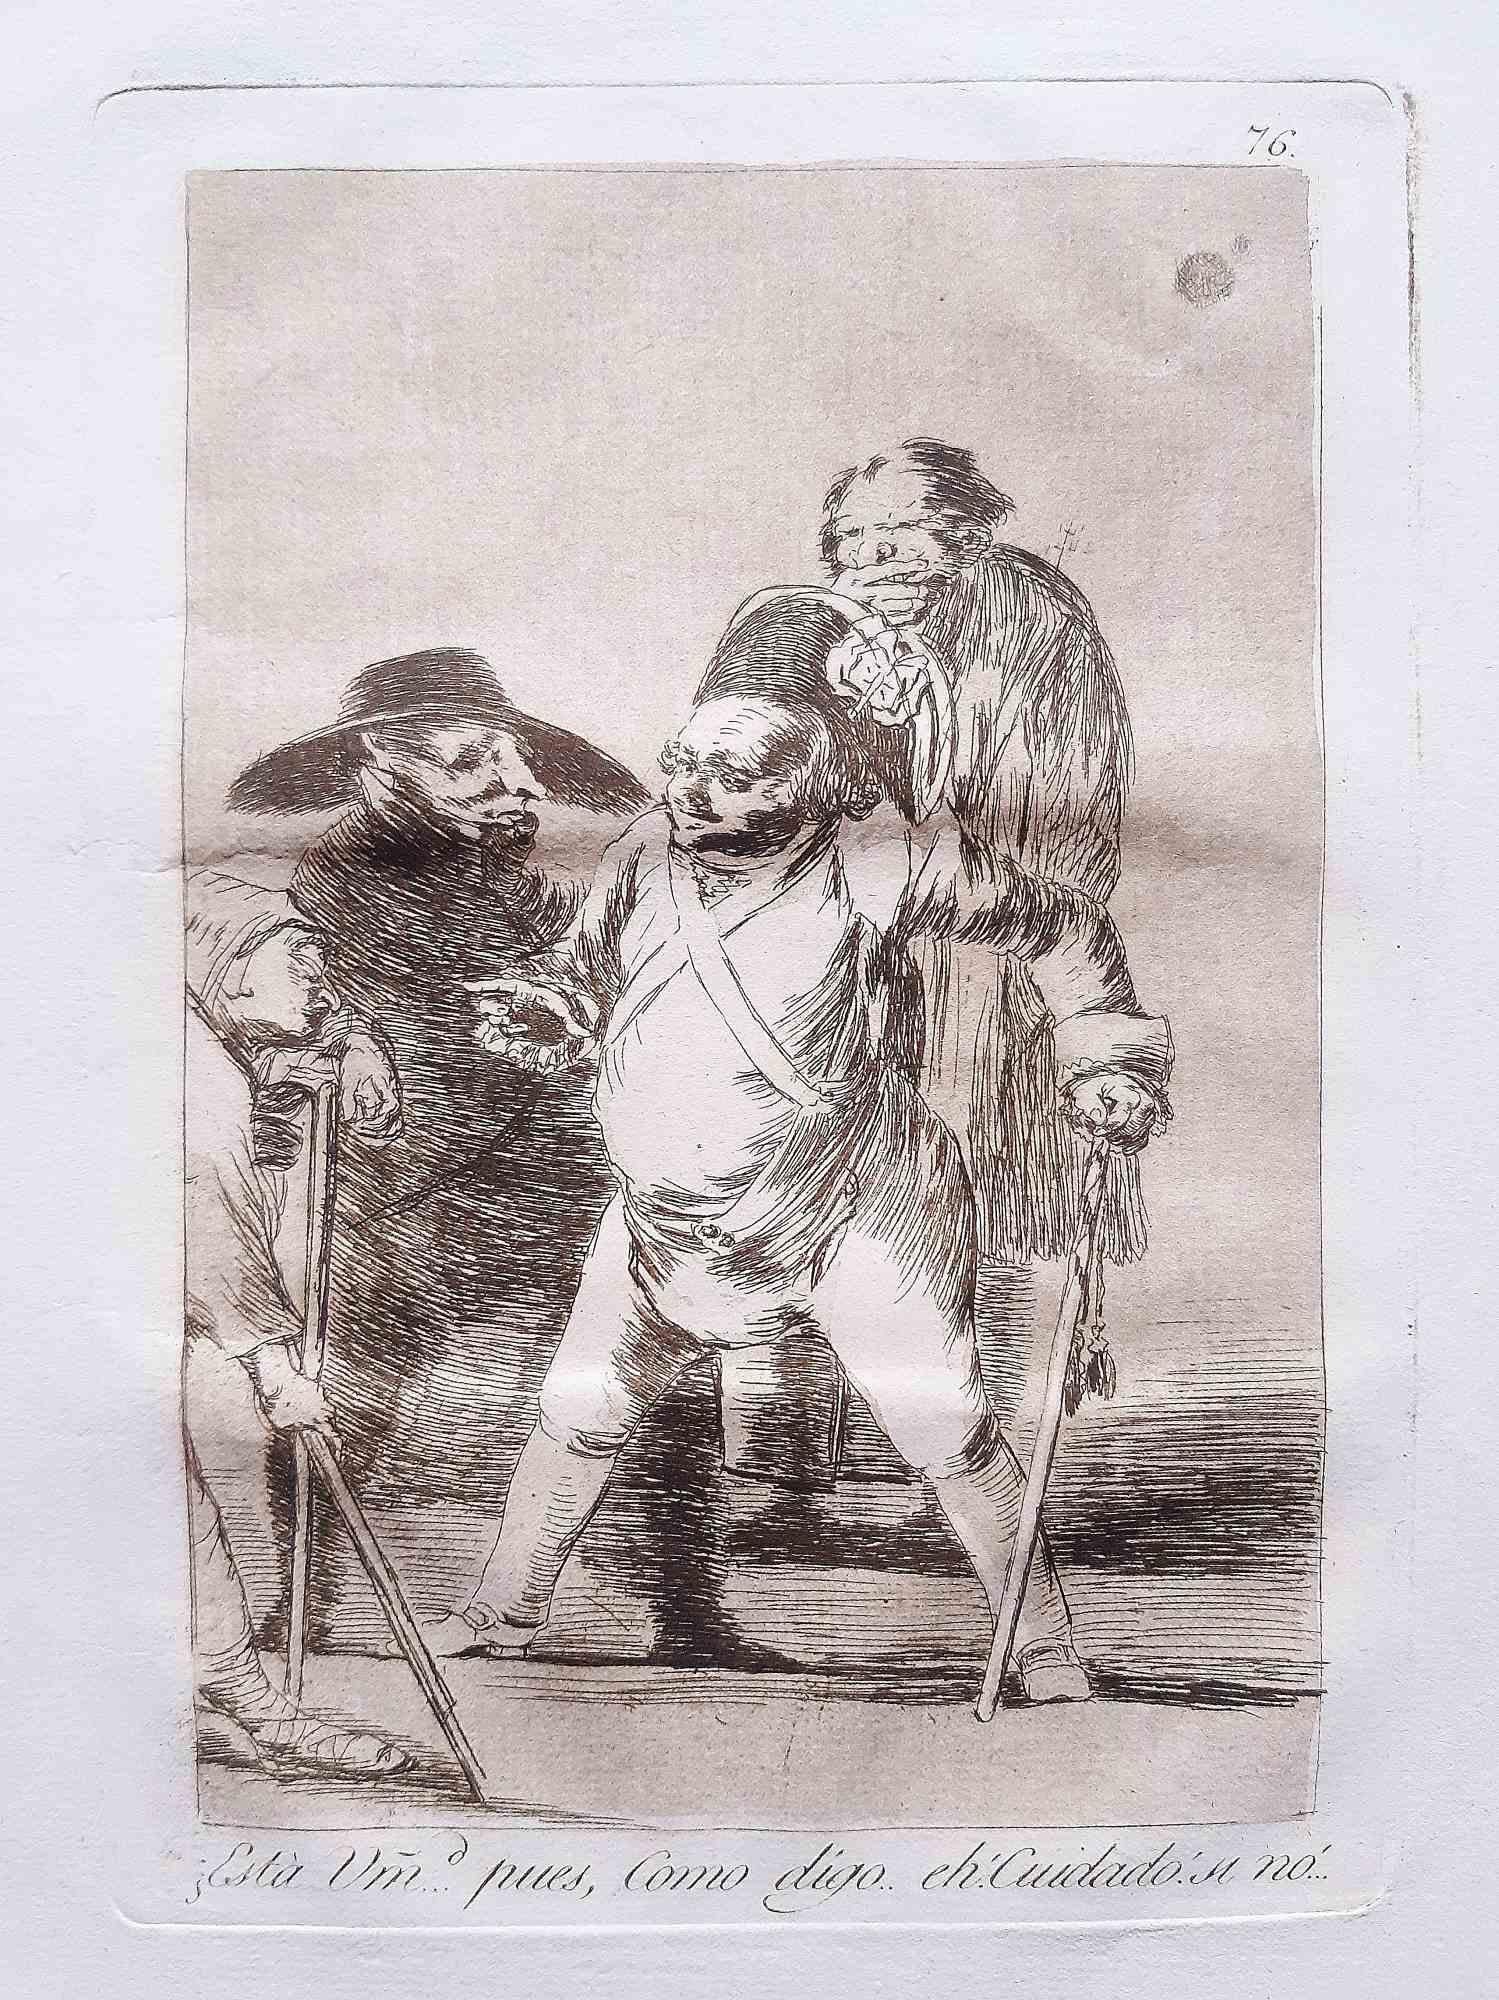 Esta usted… pues.. eh!como digo… cuidado from Los Caprichos is an original artwork realized by the artist Francisco Goya and published for the first time in 1799.

Etching and aquatint on paper.

The etching is part of the First Edition of 